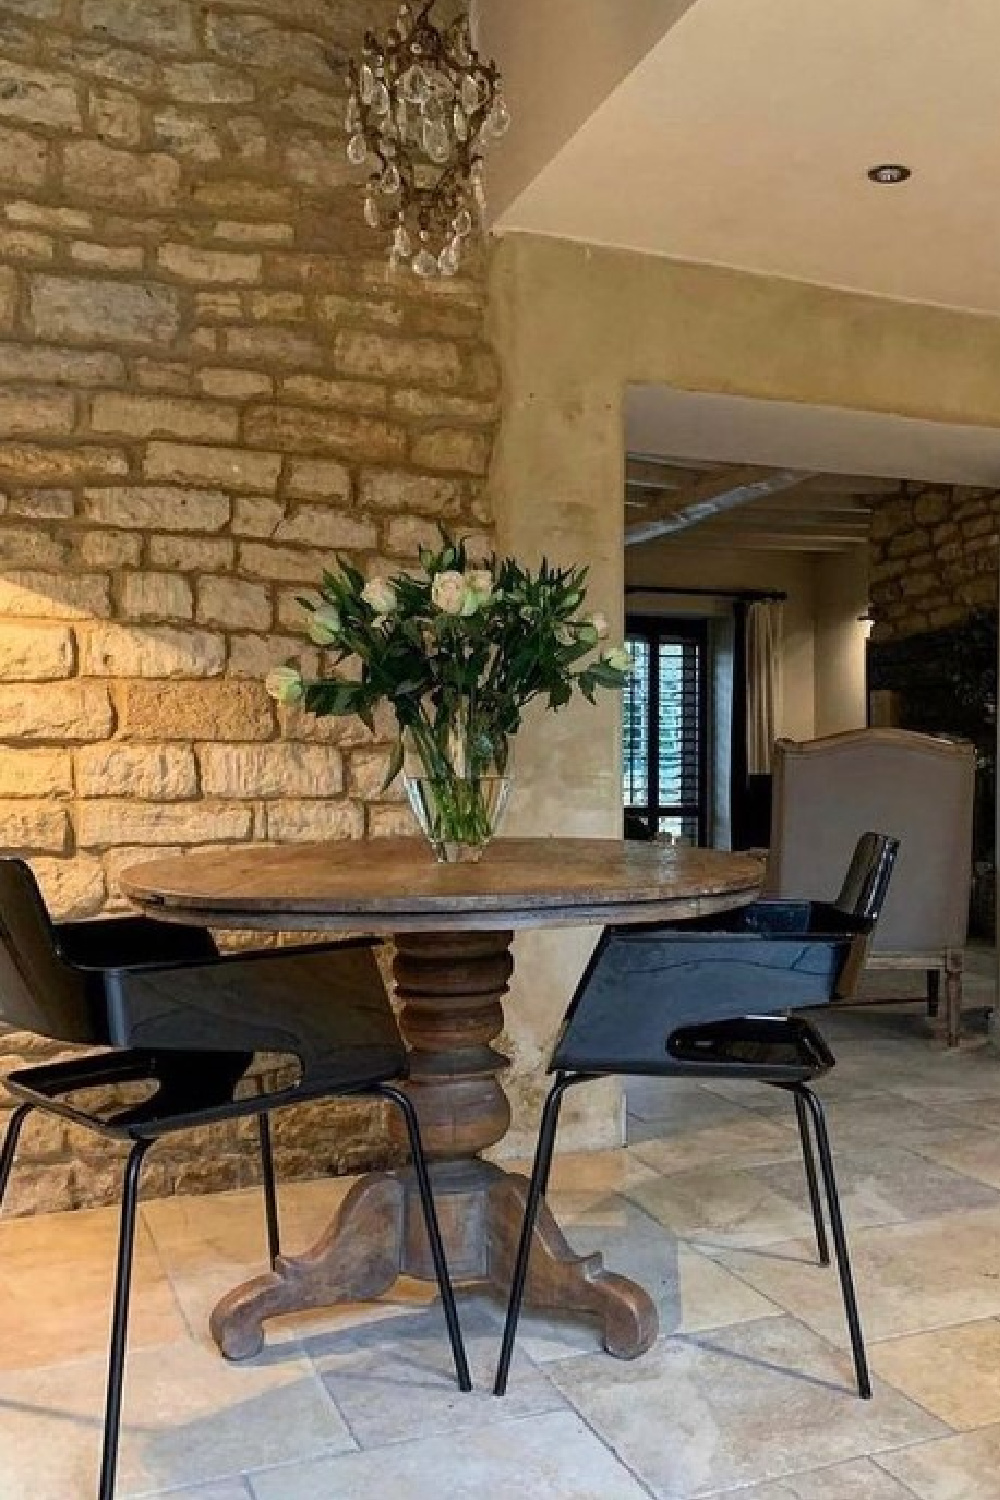 Peony Cottage - a vacation rental in the Cotswolds - @peonycottagecotswolds. #cotswoldscottage #englishcountry